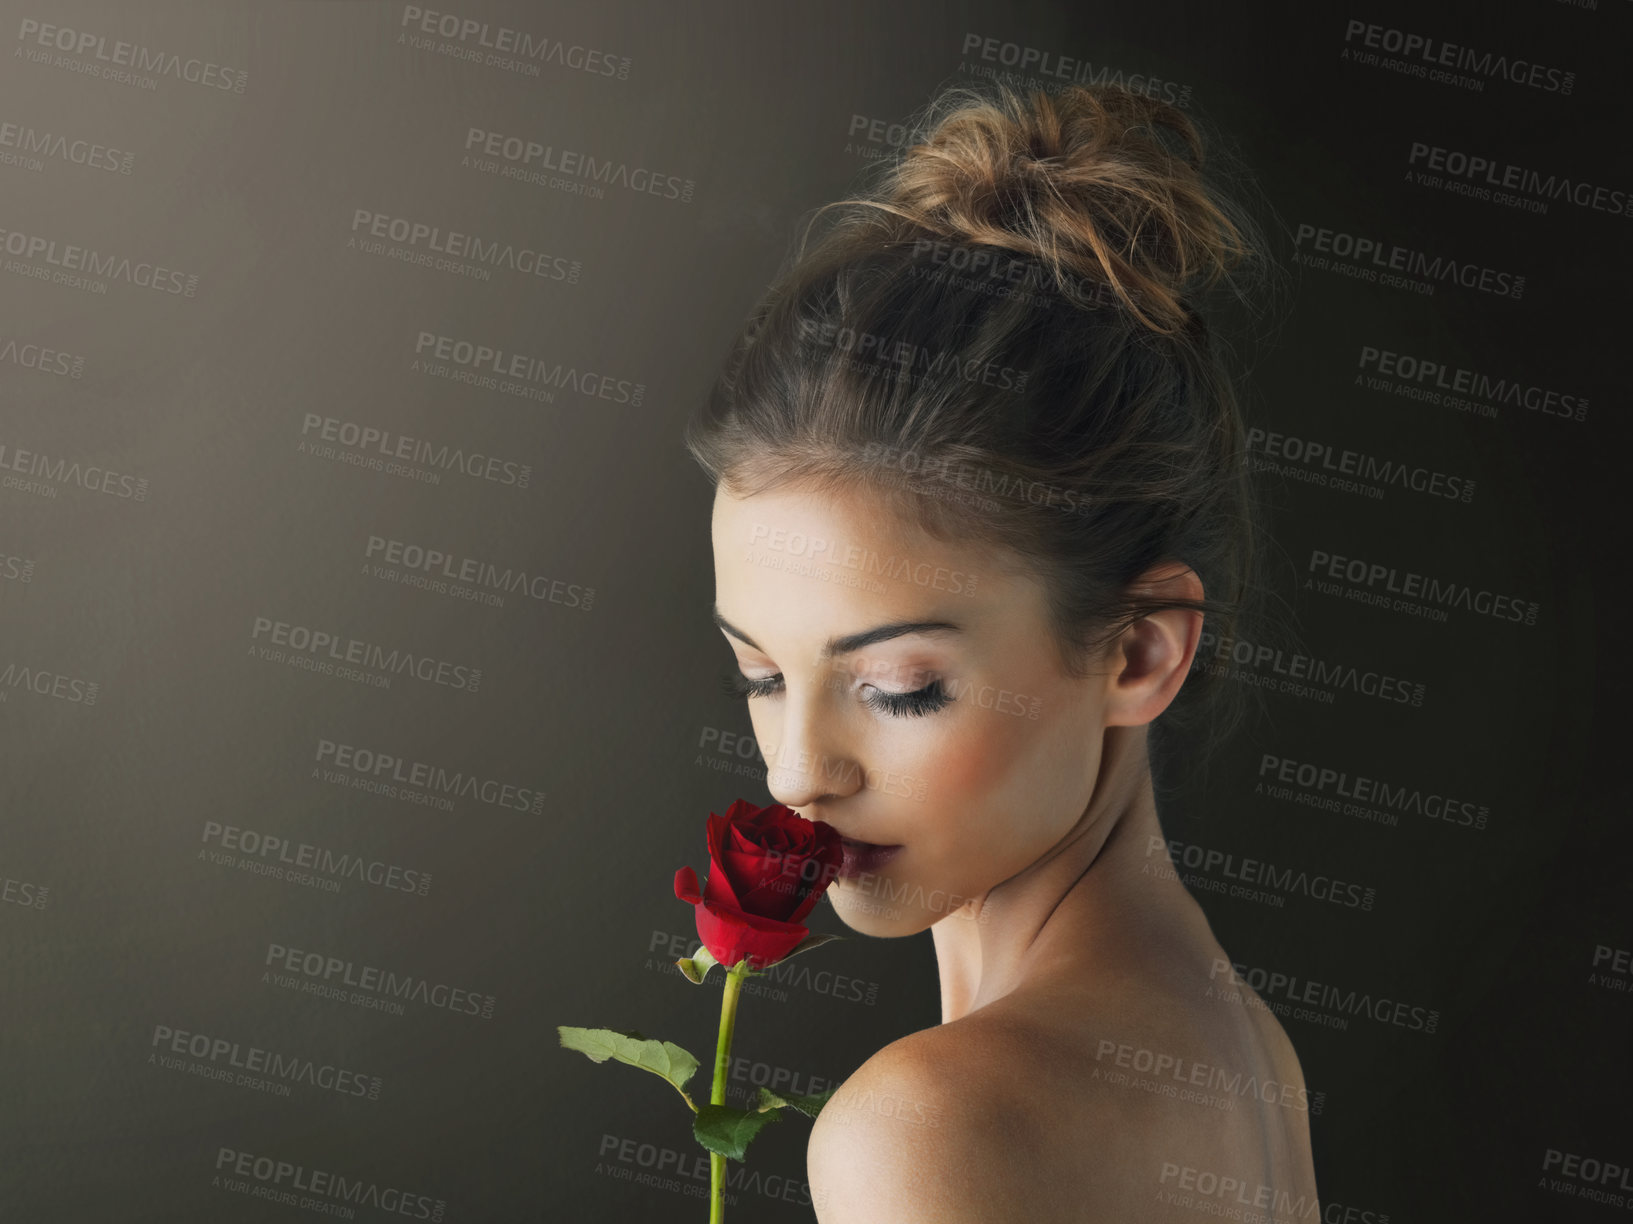 Buy stock photo Shot of a young woman holding a red rose against a dark background